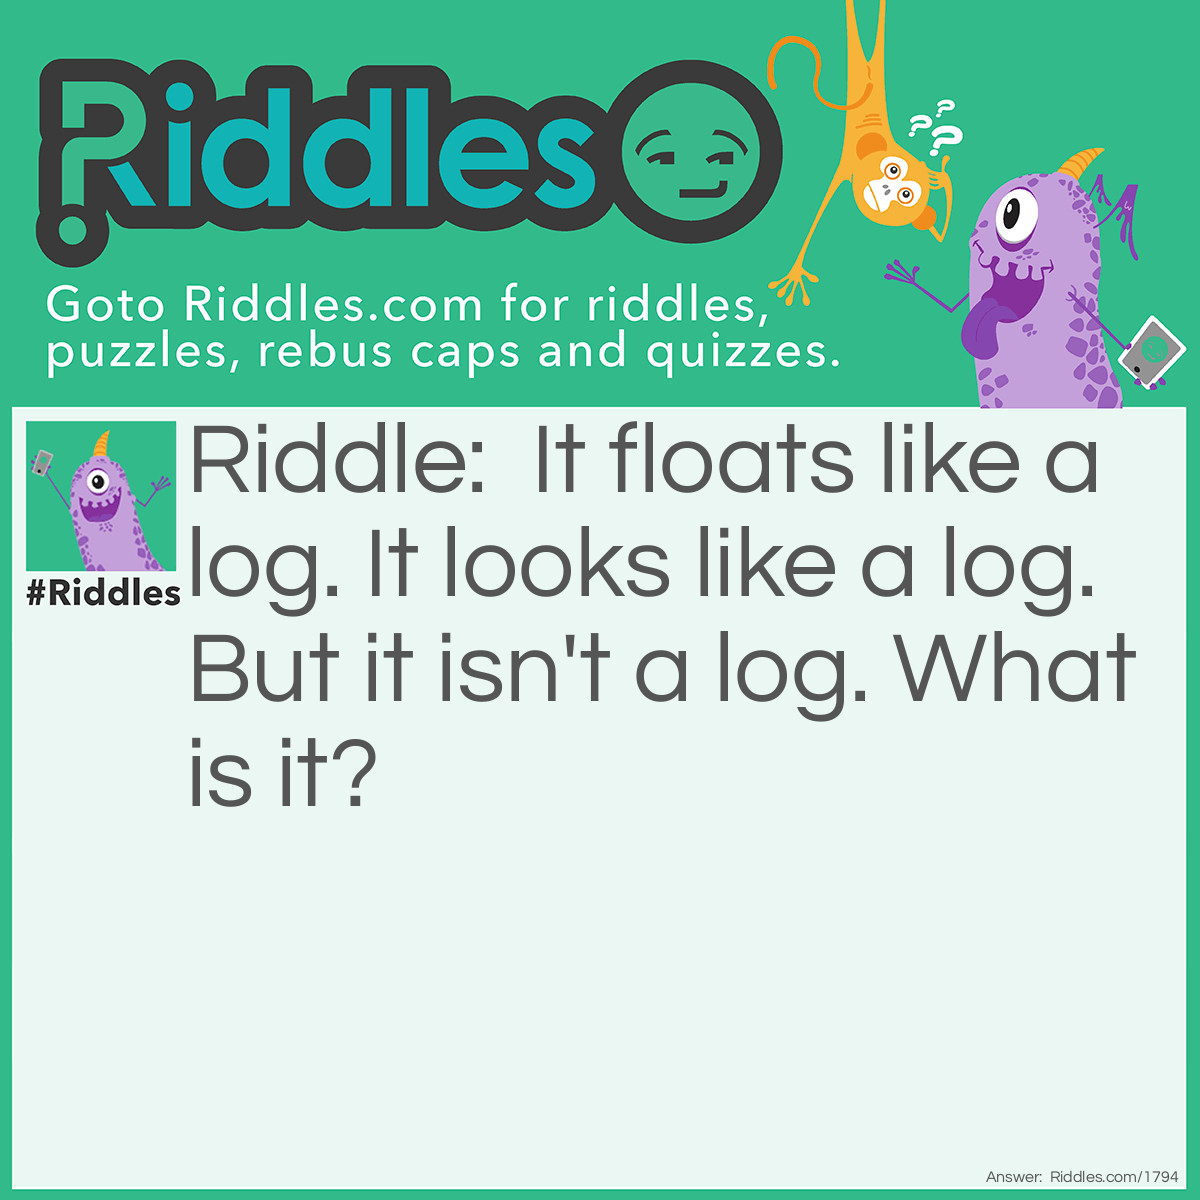 Riddle: It floats like a log. It look likes a log. But it isn't a log. What is it? Answer: An alligator.